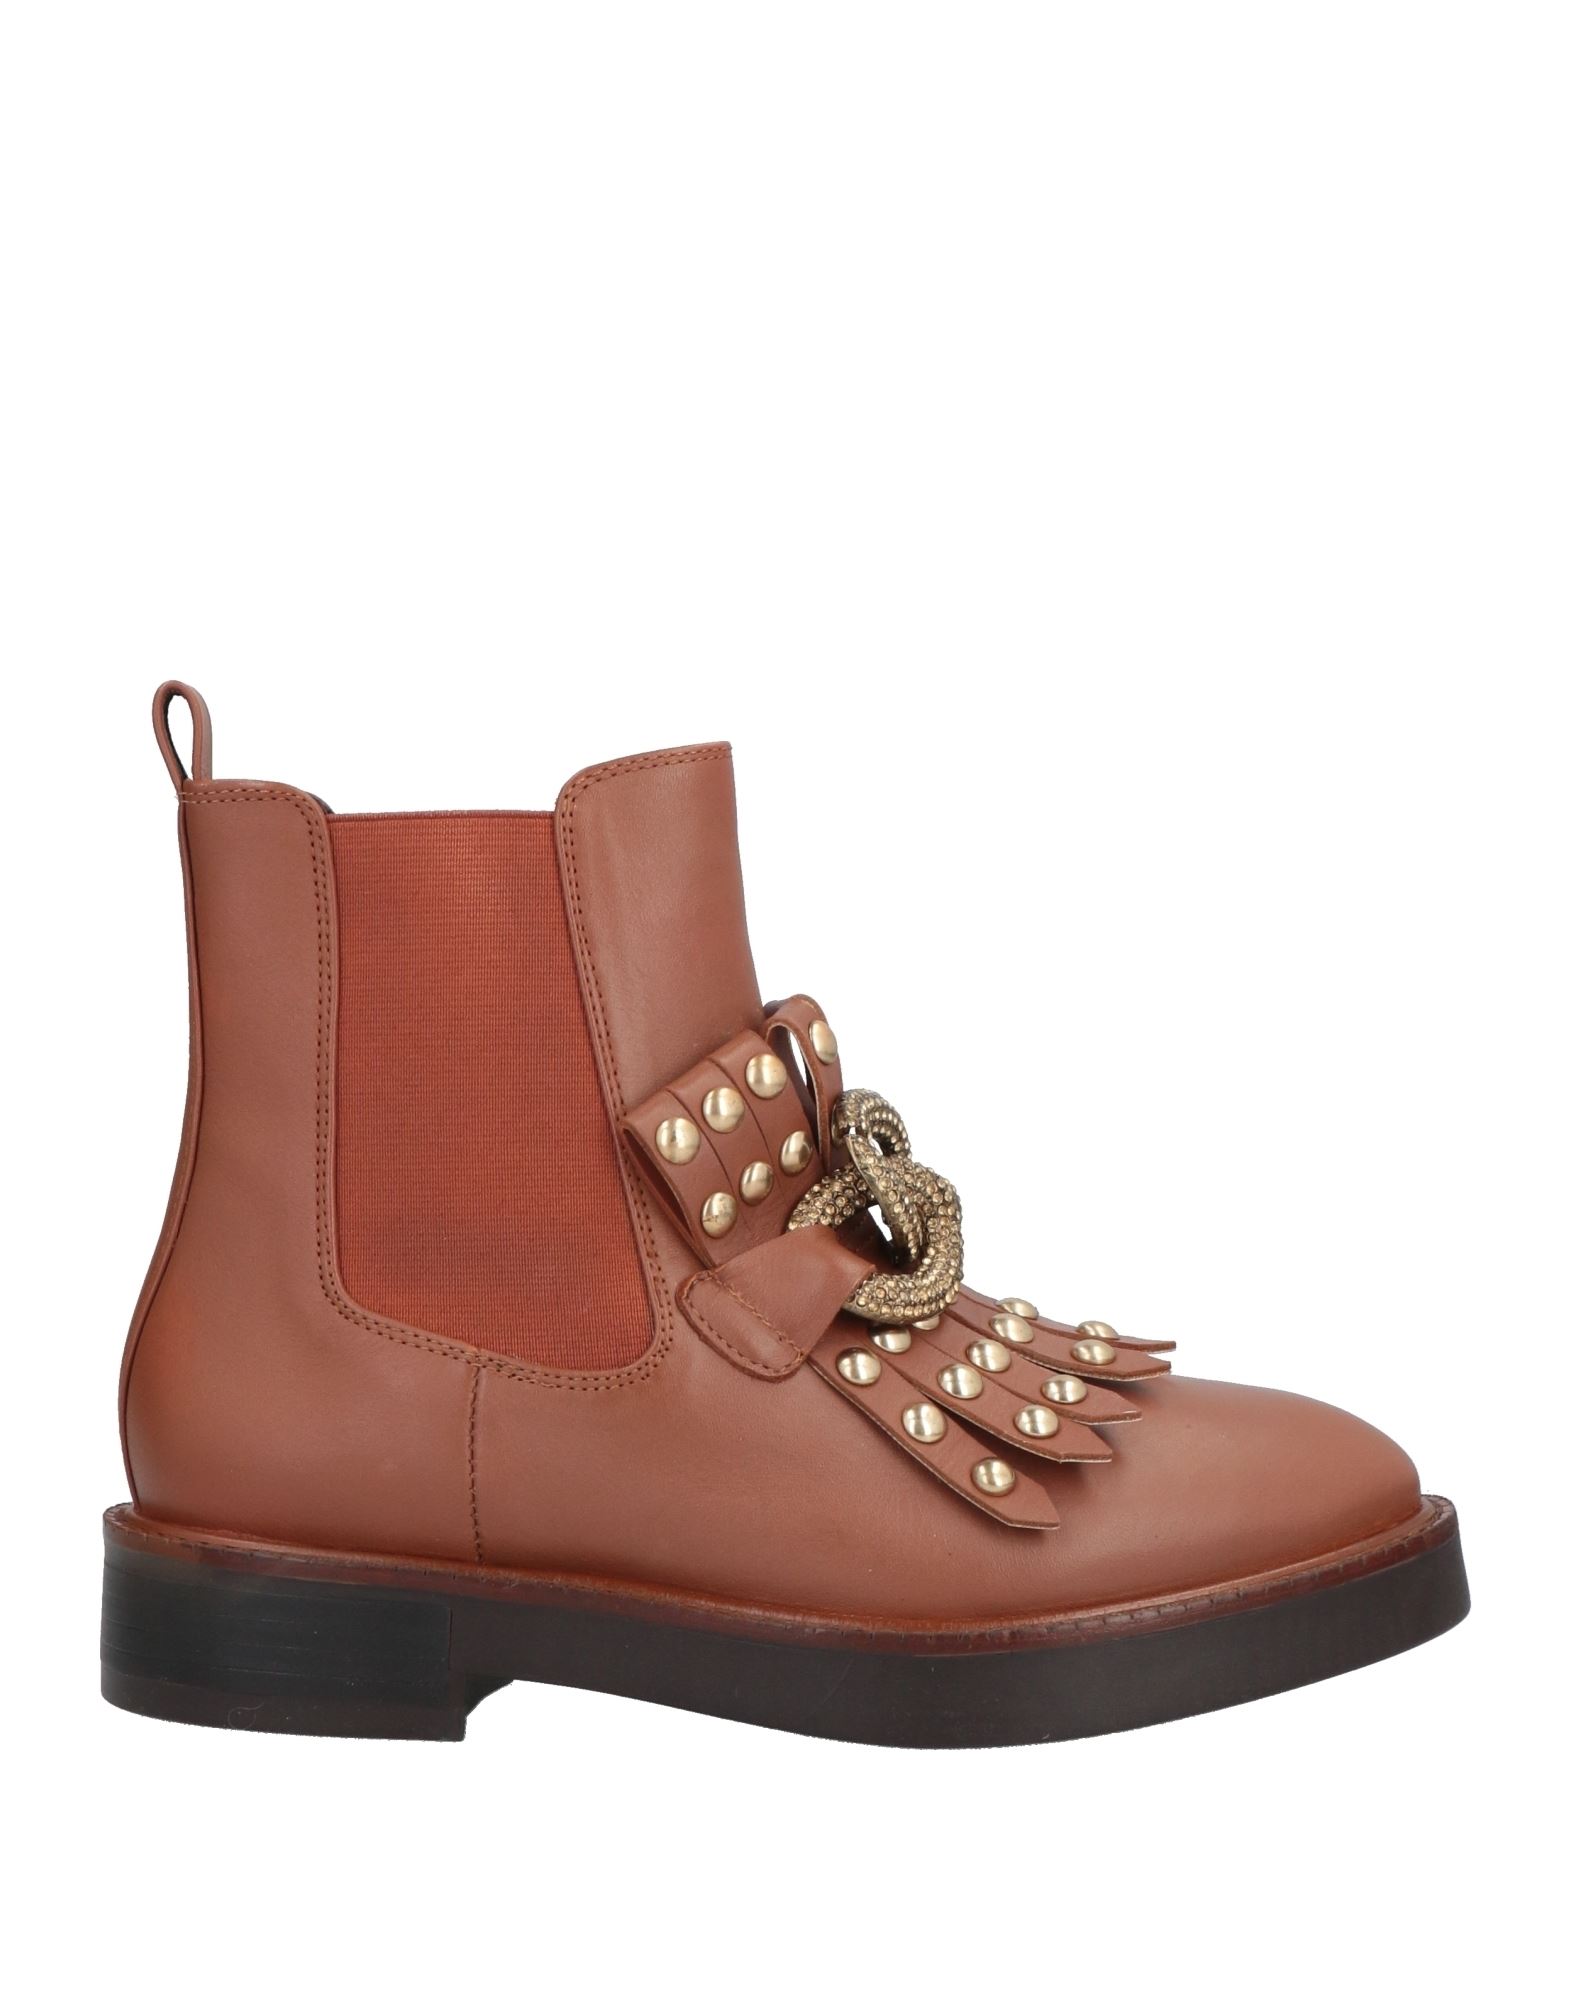 Emanuélle Vee Ankle Boots In Brown